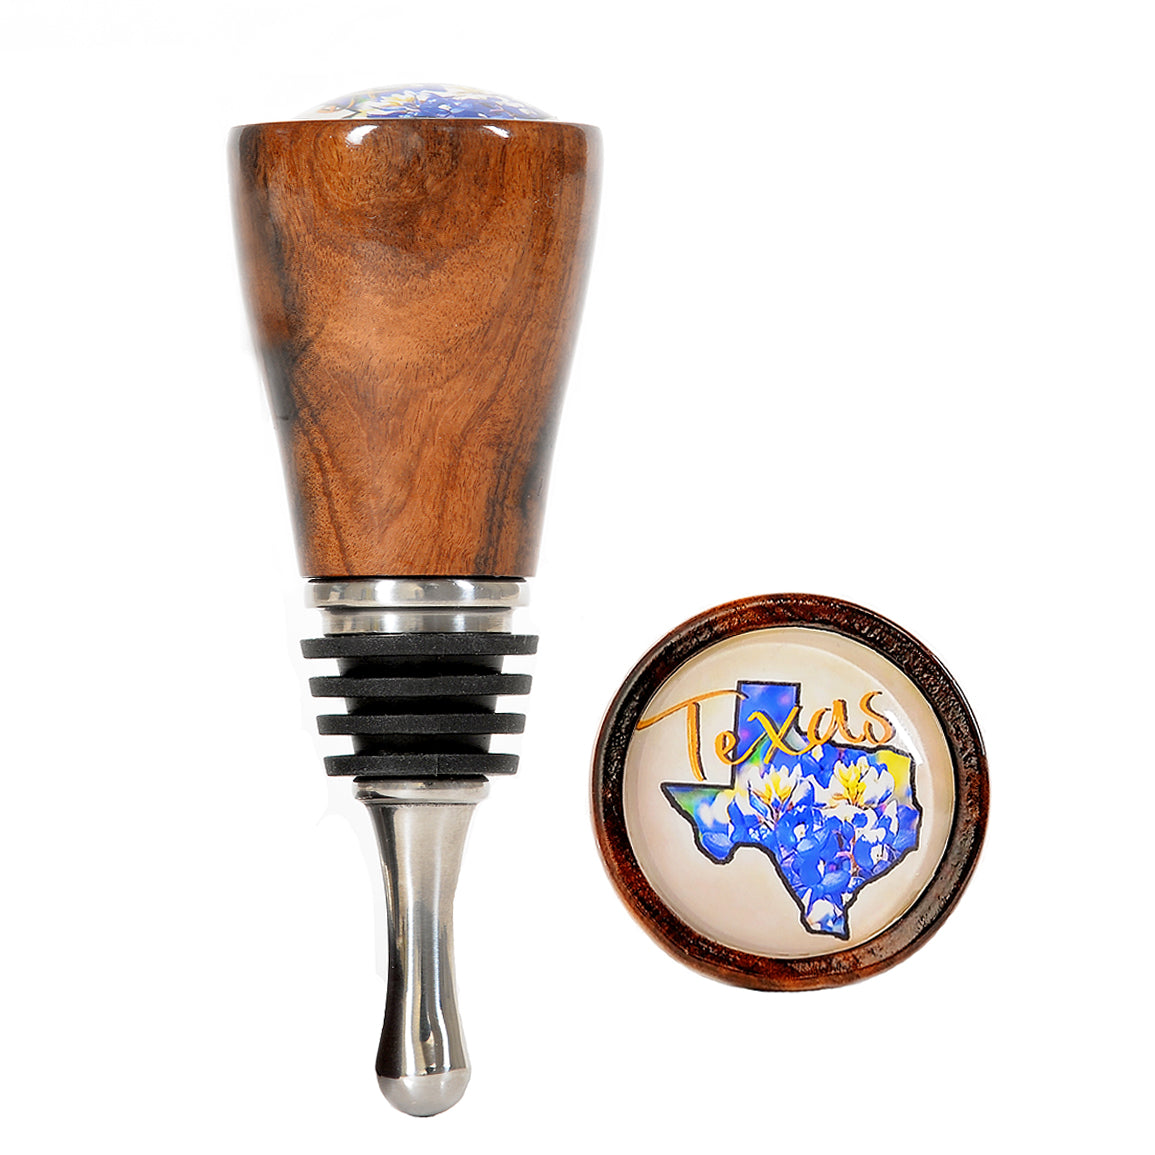 Texas Bluebonnets with Bolivian Rosewood